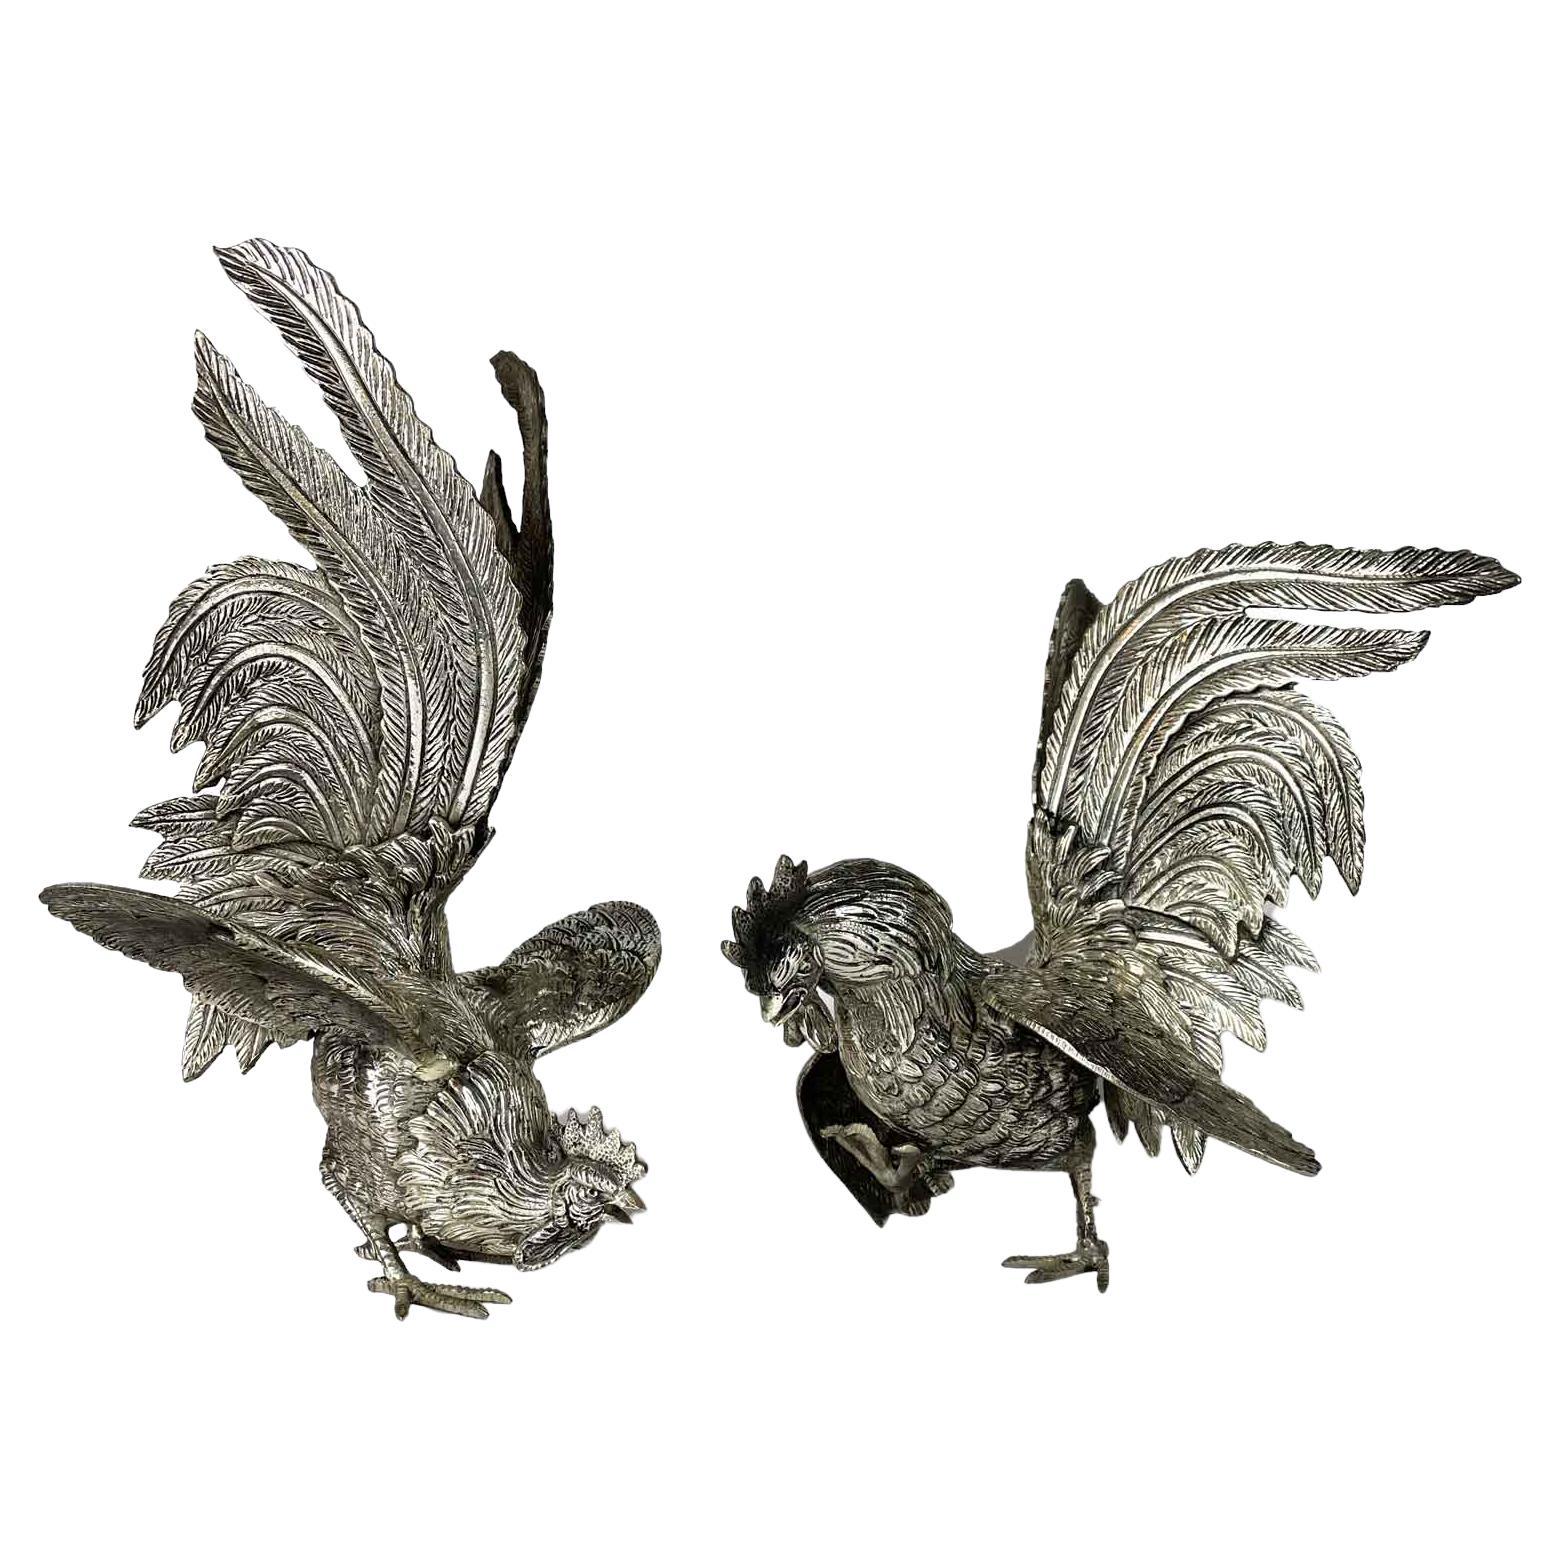 Italian Pair of Rooster Figures 20th Century Art Nouveau Animalier Sculptures For Sale